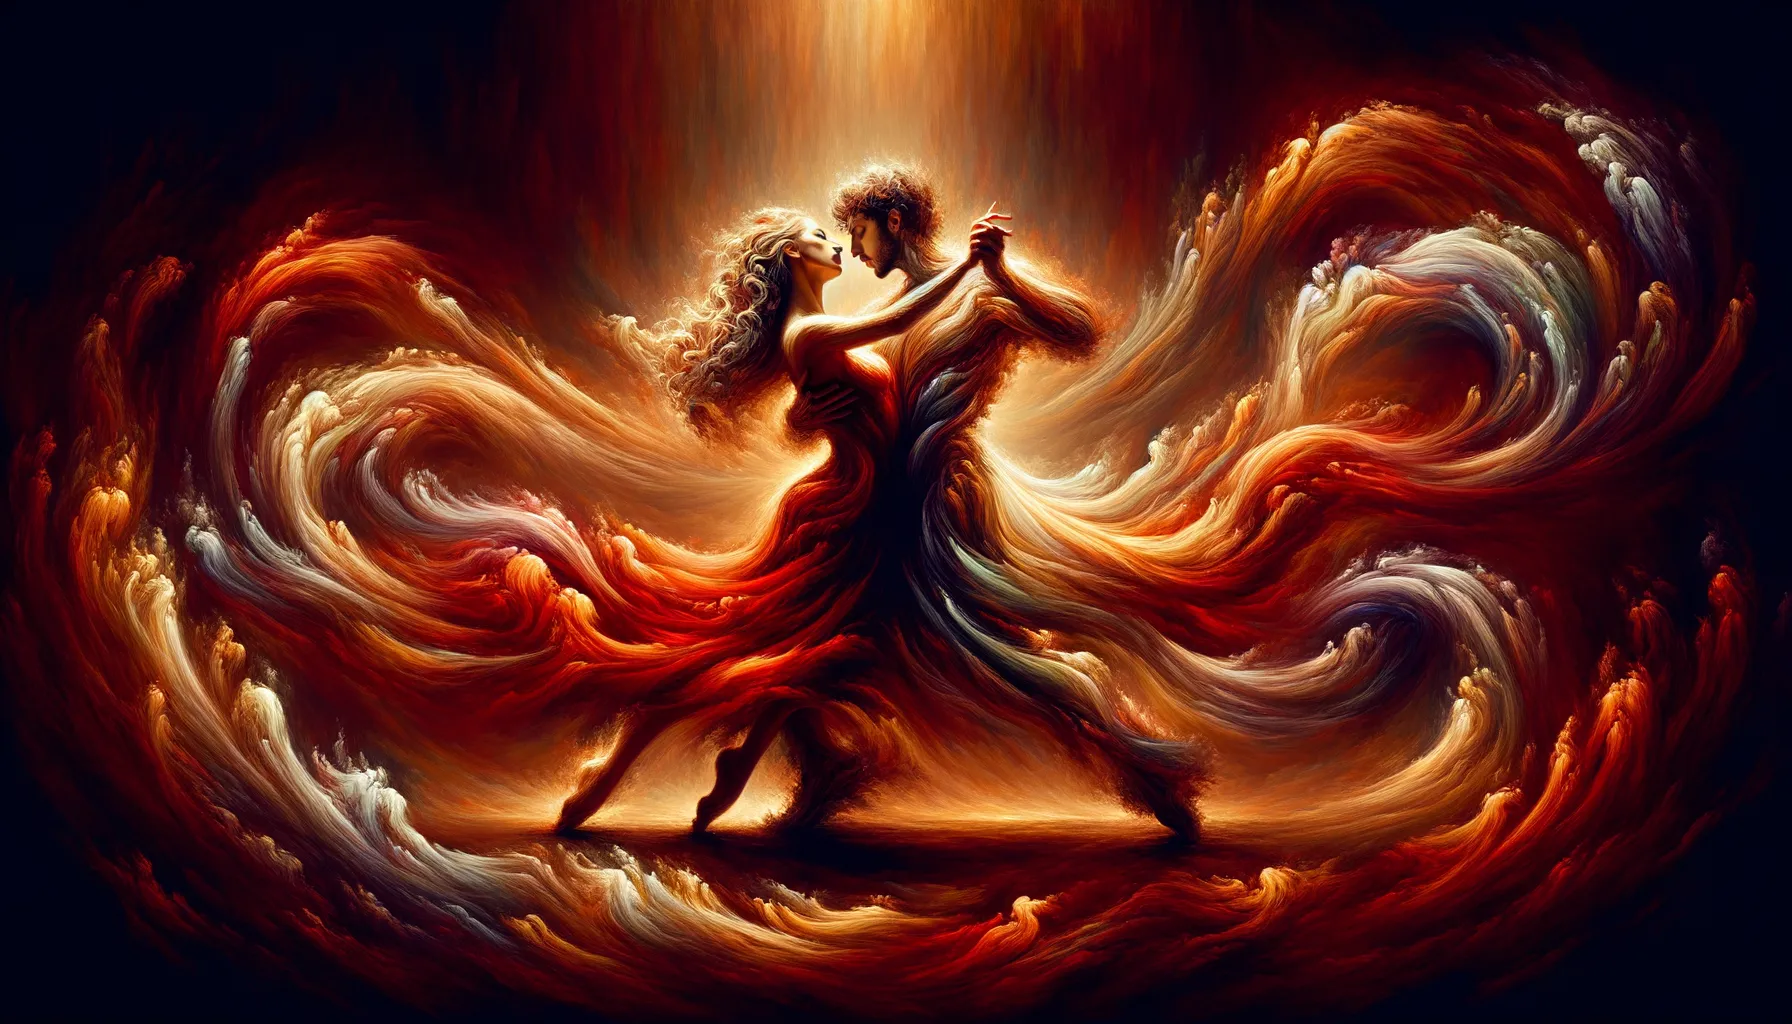 Like dancers in an eternal waltz, this image embodies the intricate balance of closeness and individuality that fuels the flame of desire in long-term relationships, an essential theme for those seeking to keep love's embers burning bright.